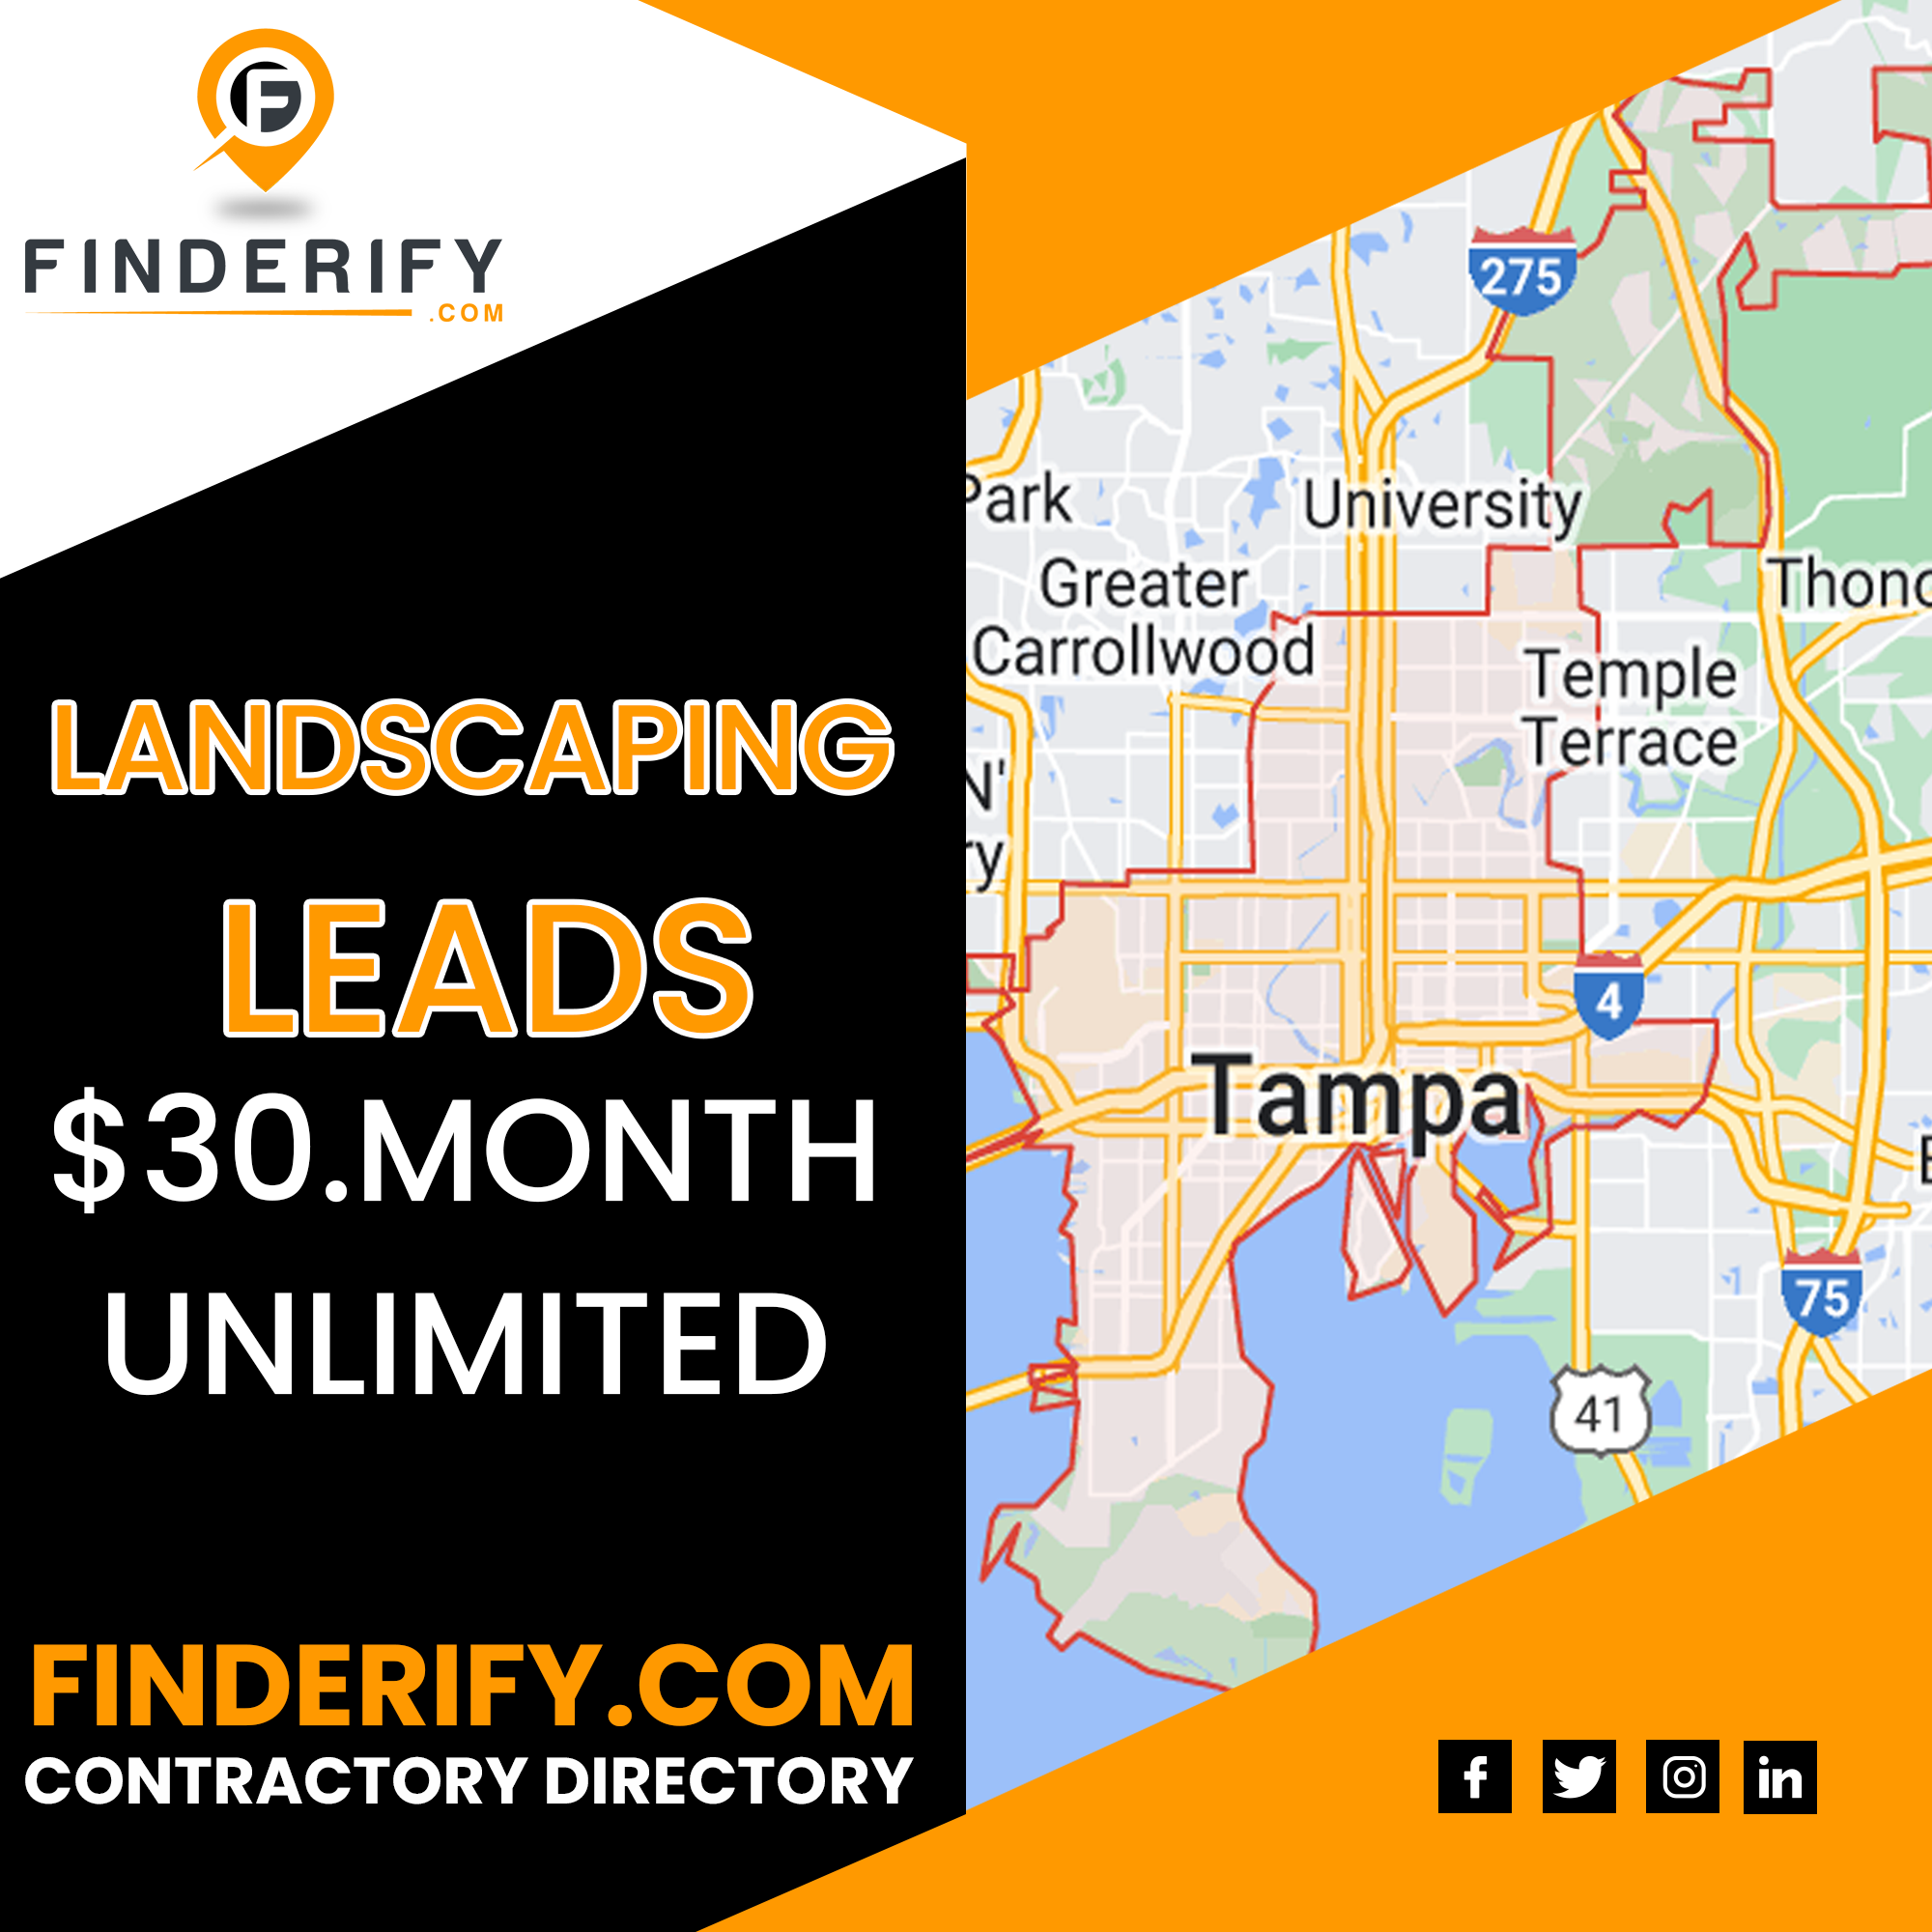 Landscaping Services in Tampa, Florida - FINDERIFY.COM